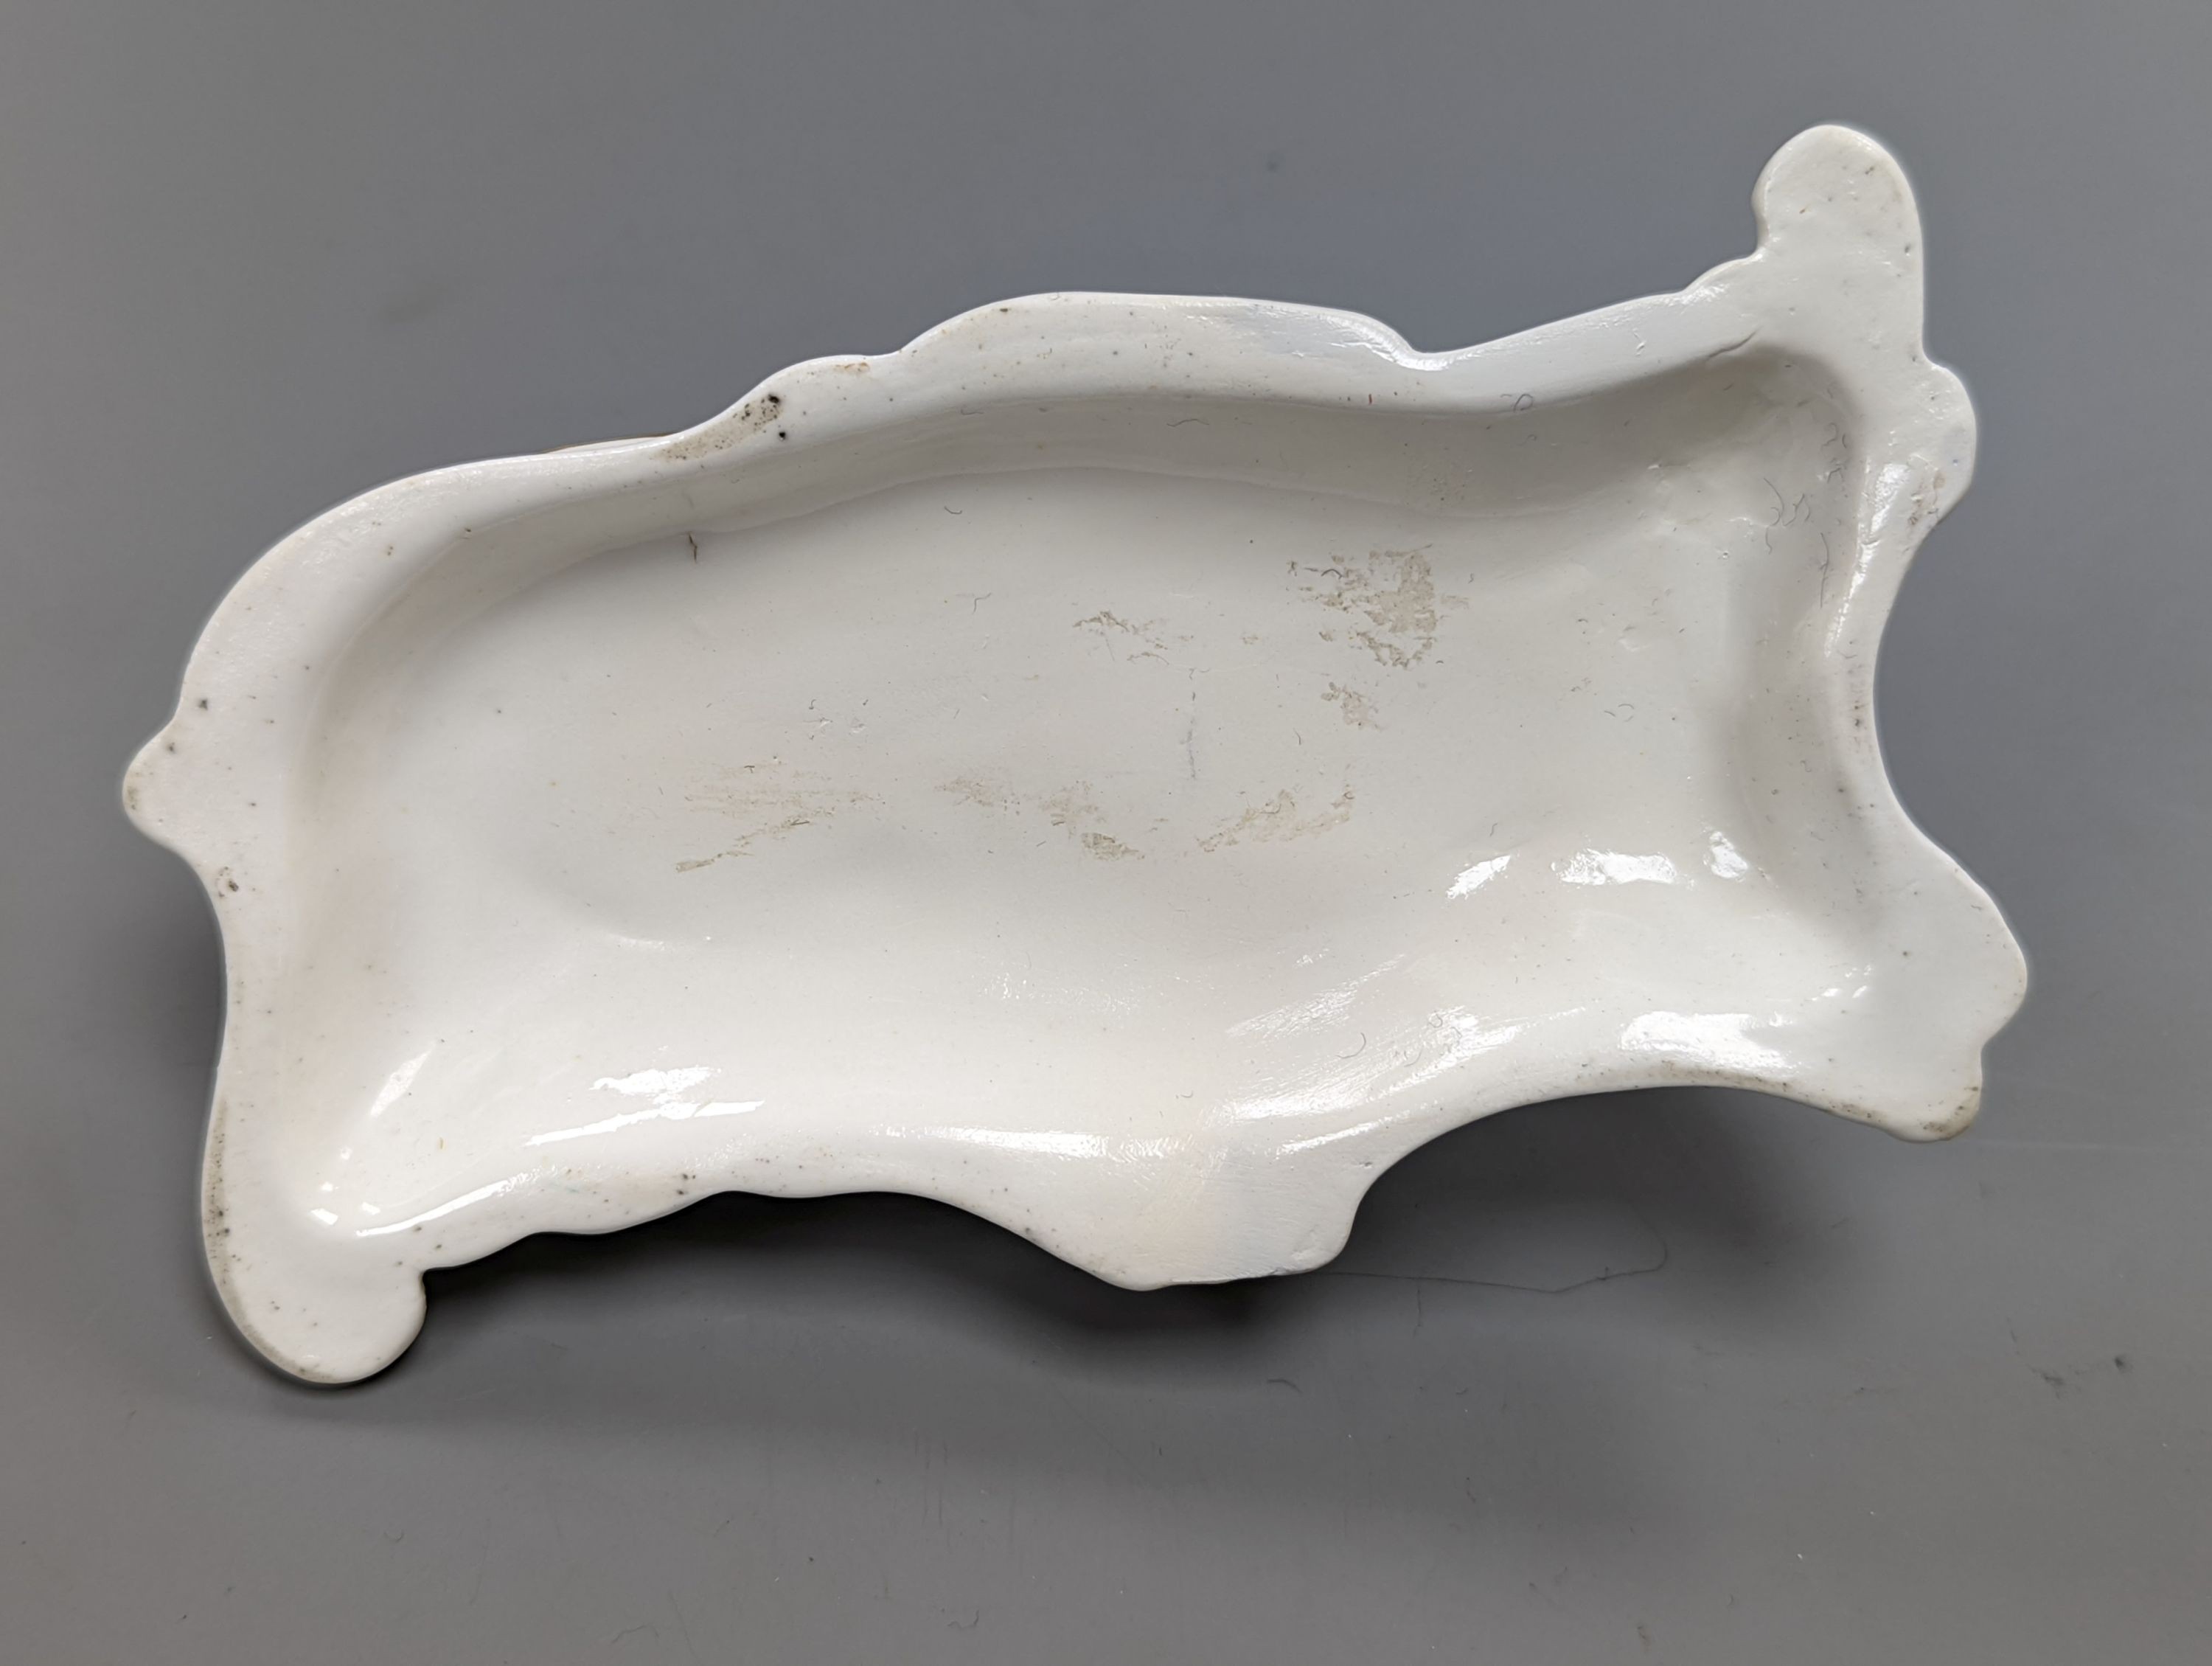 A rare Staffordshire porcelain figure of a recumbent tabby cat, c.1830-50, on a scroll work base, 11.5 cm long